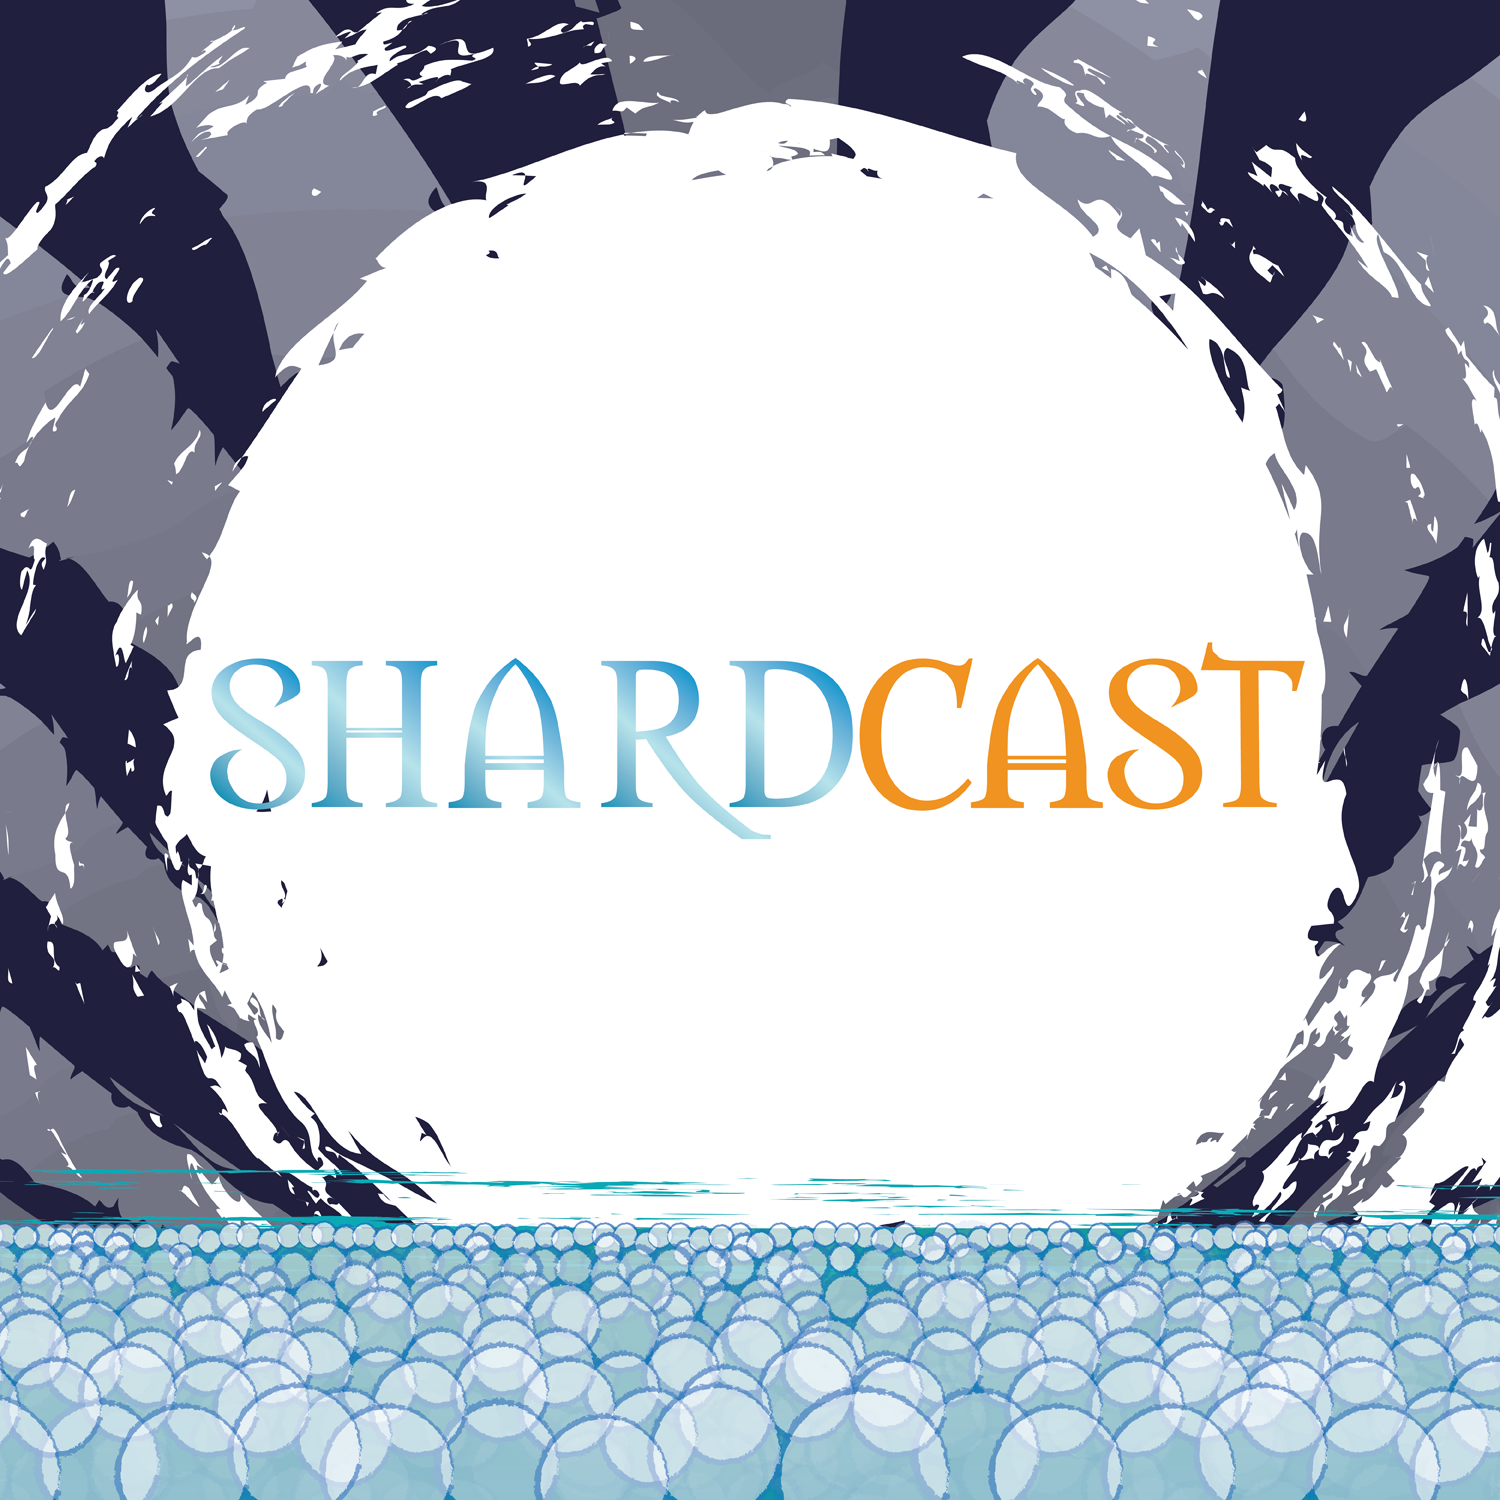 More information about "Shardcast: Lord of Scars"